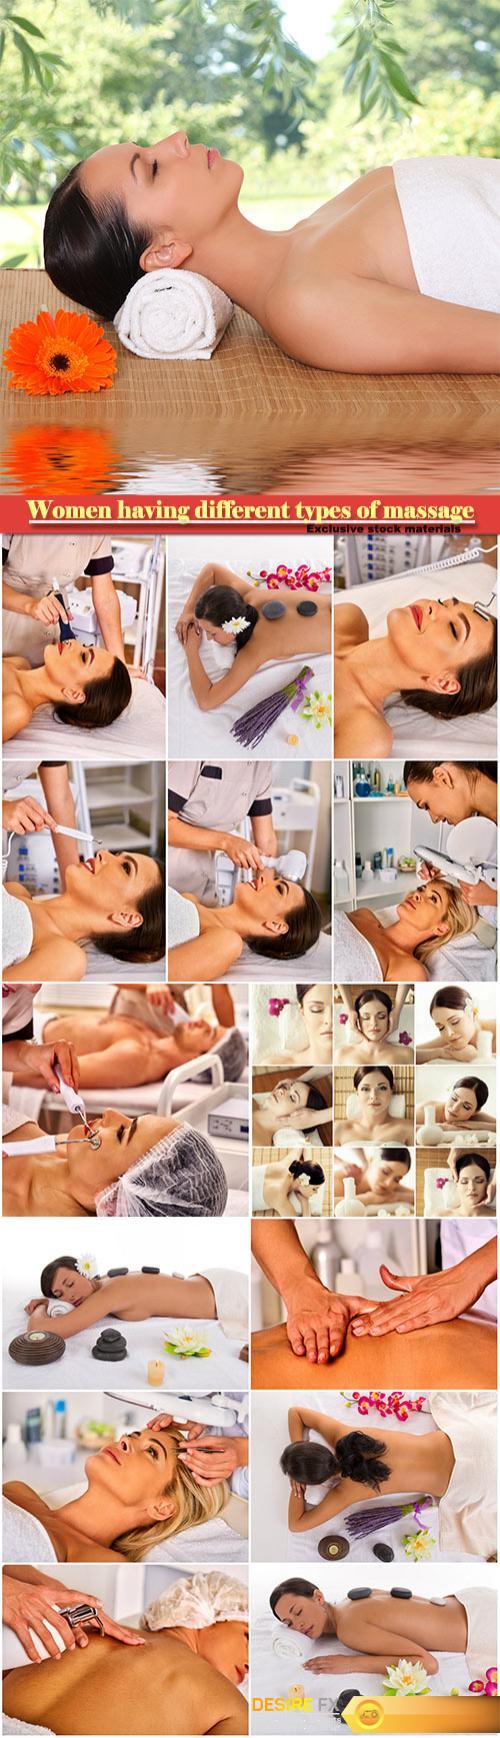 Collection of photos with women having different types of massage, spa, wellness, health care and aromatherapy college